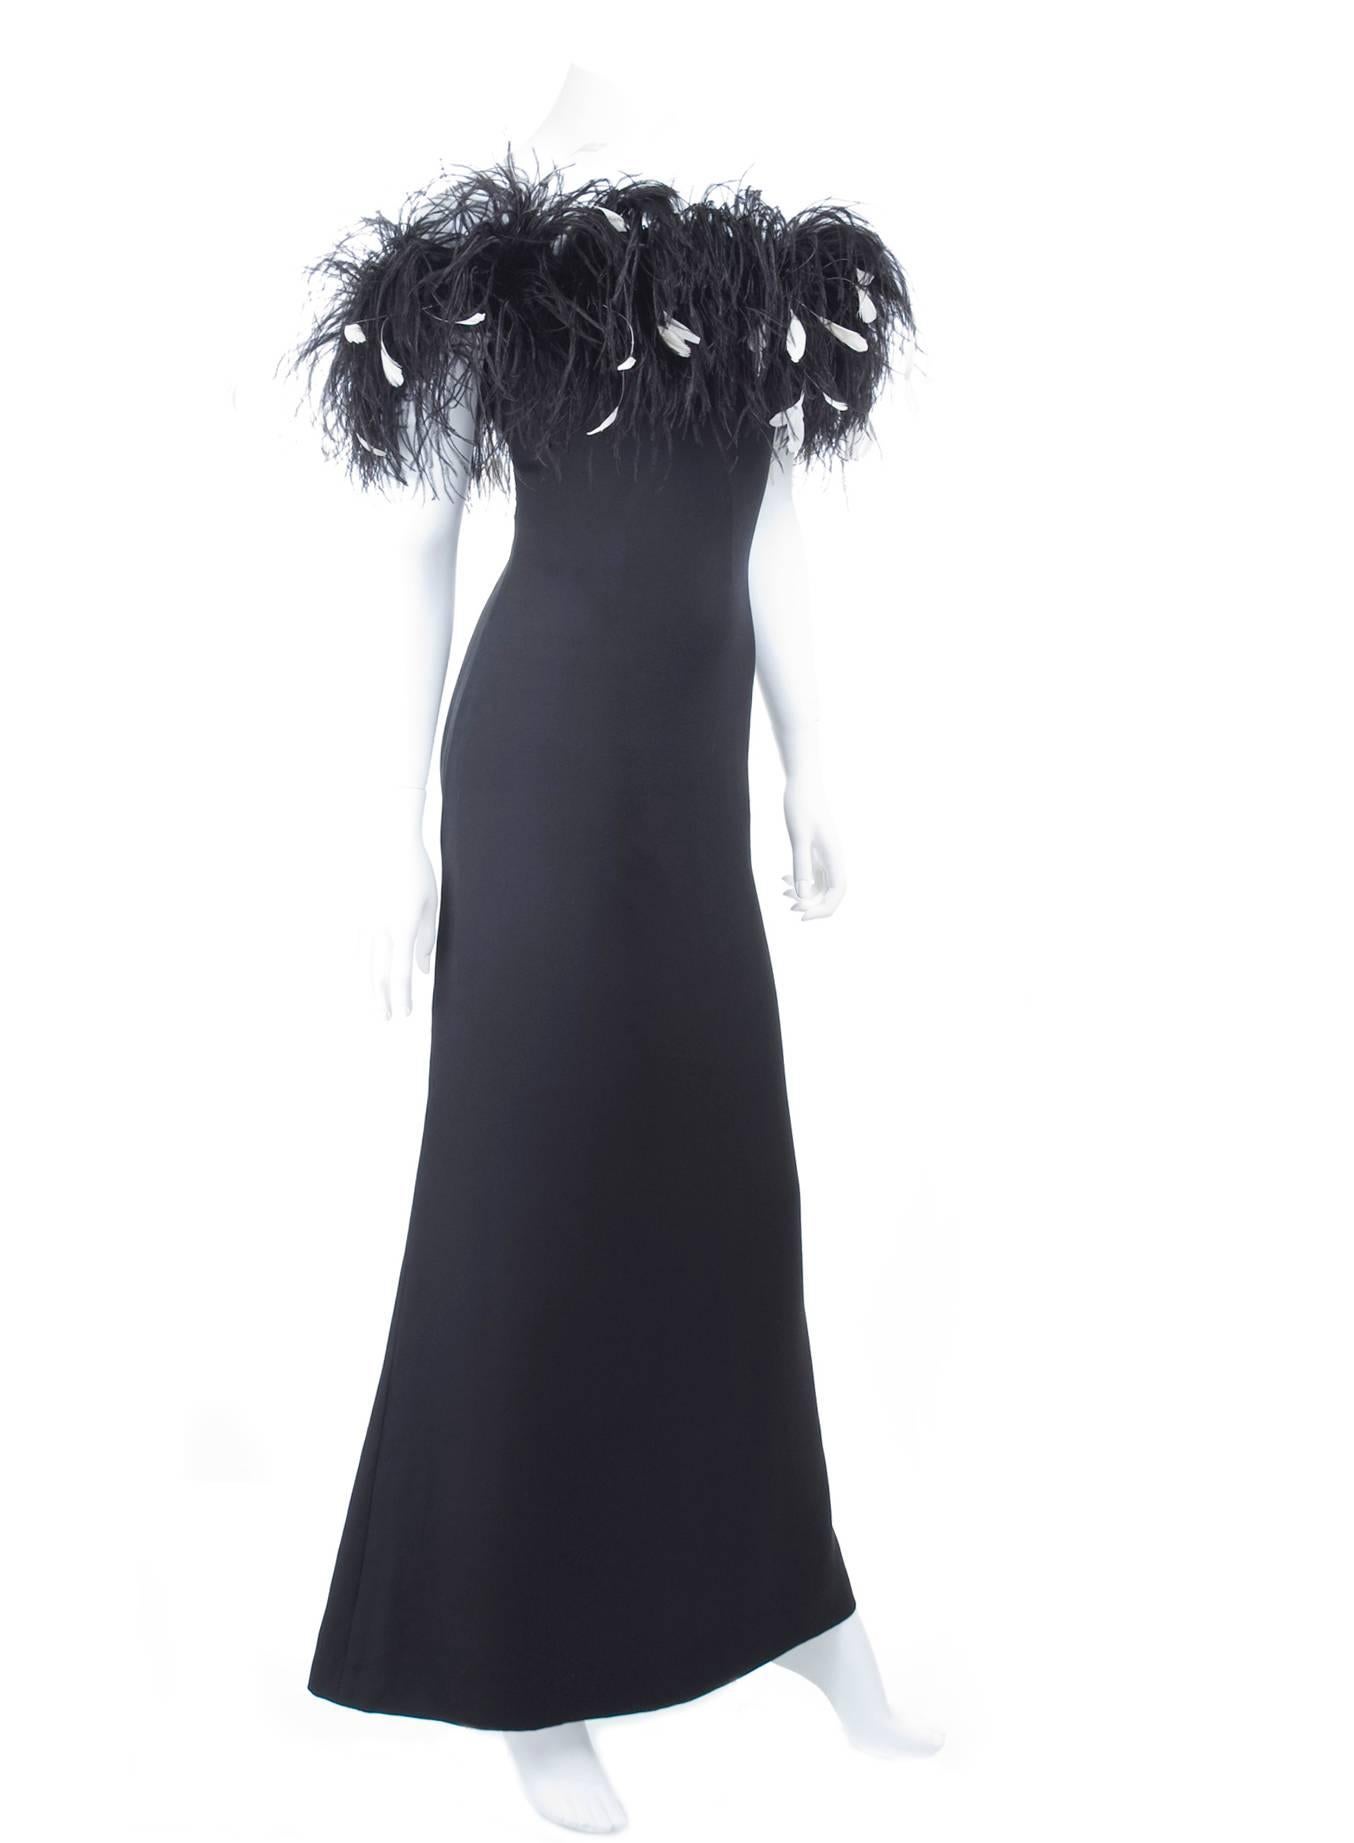 Yves Saint Laurent Gown with Feathers 1